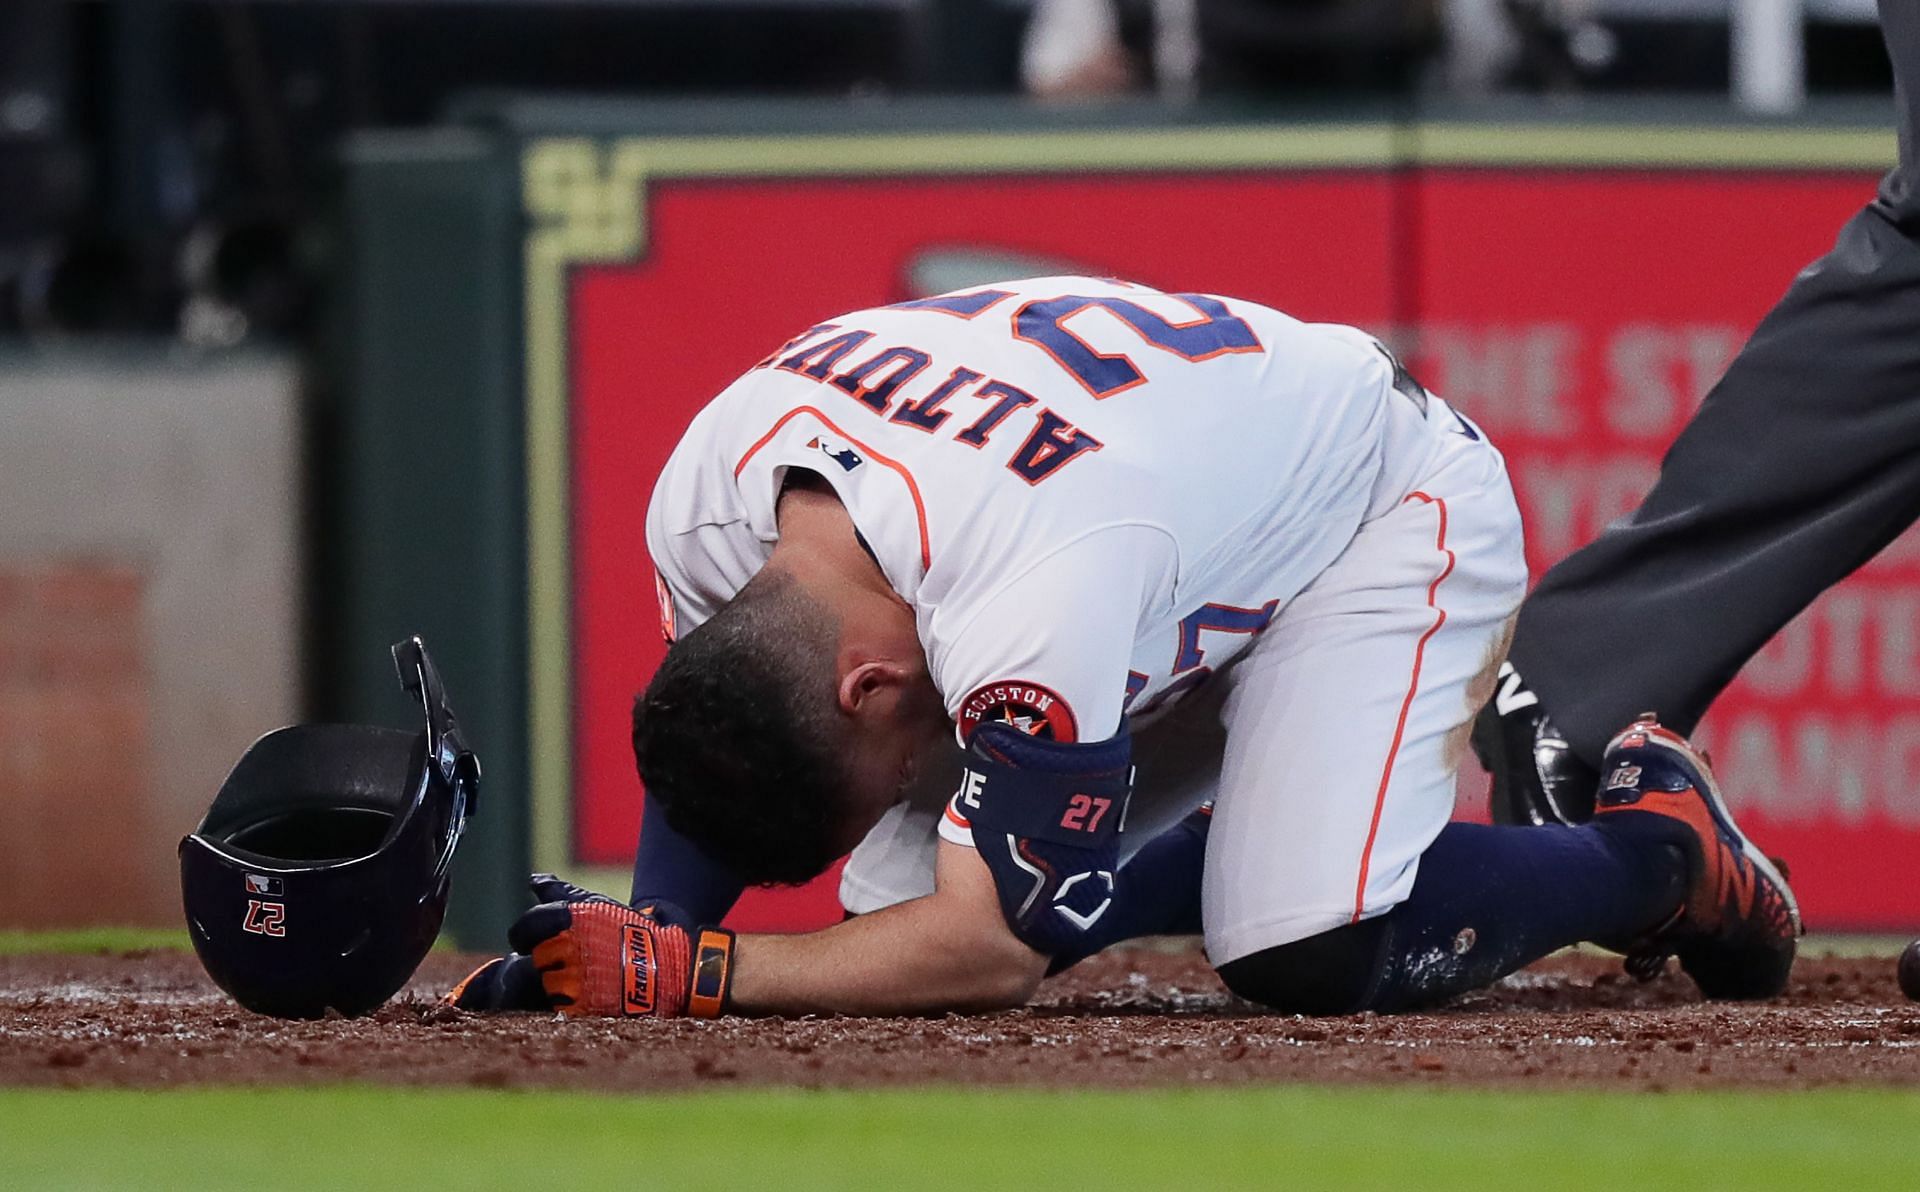 Houston Astros second baseman Jose Altuve collapsed in pain after a foul ball he struck hit his groin. The Houston Astros second baseman was batting .182 on the season